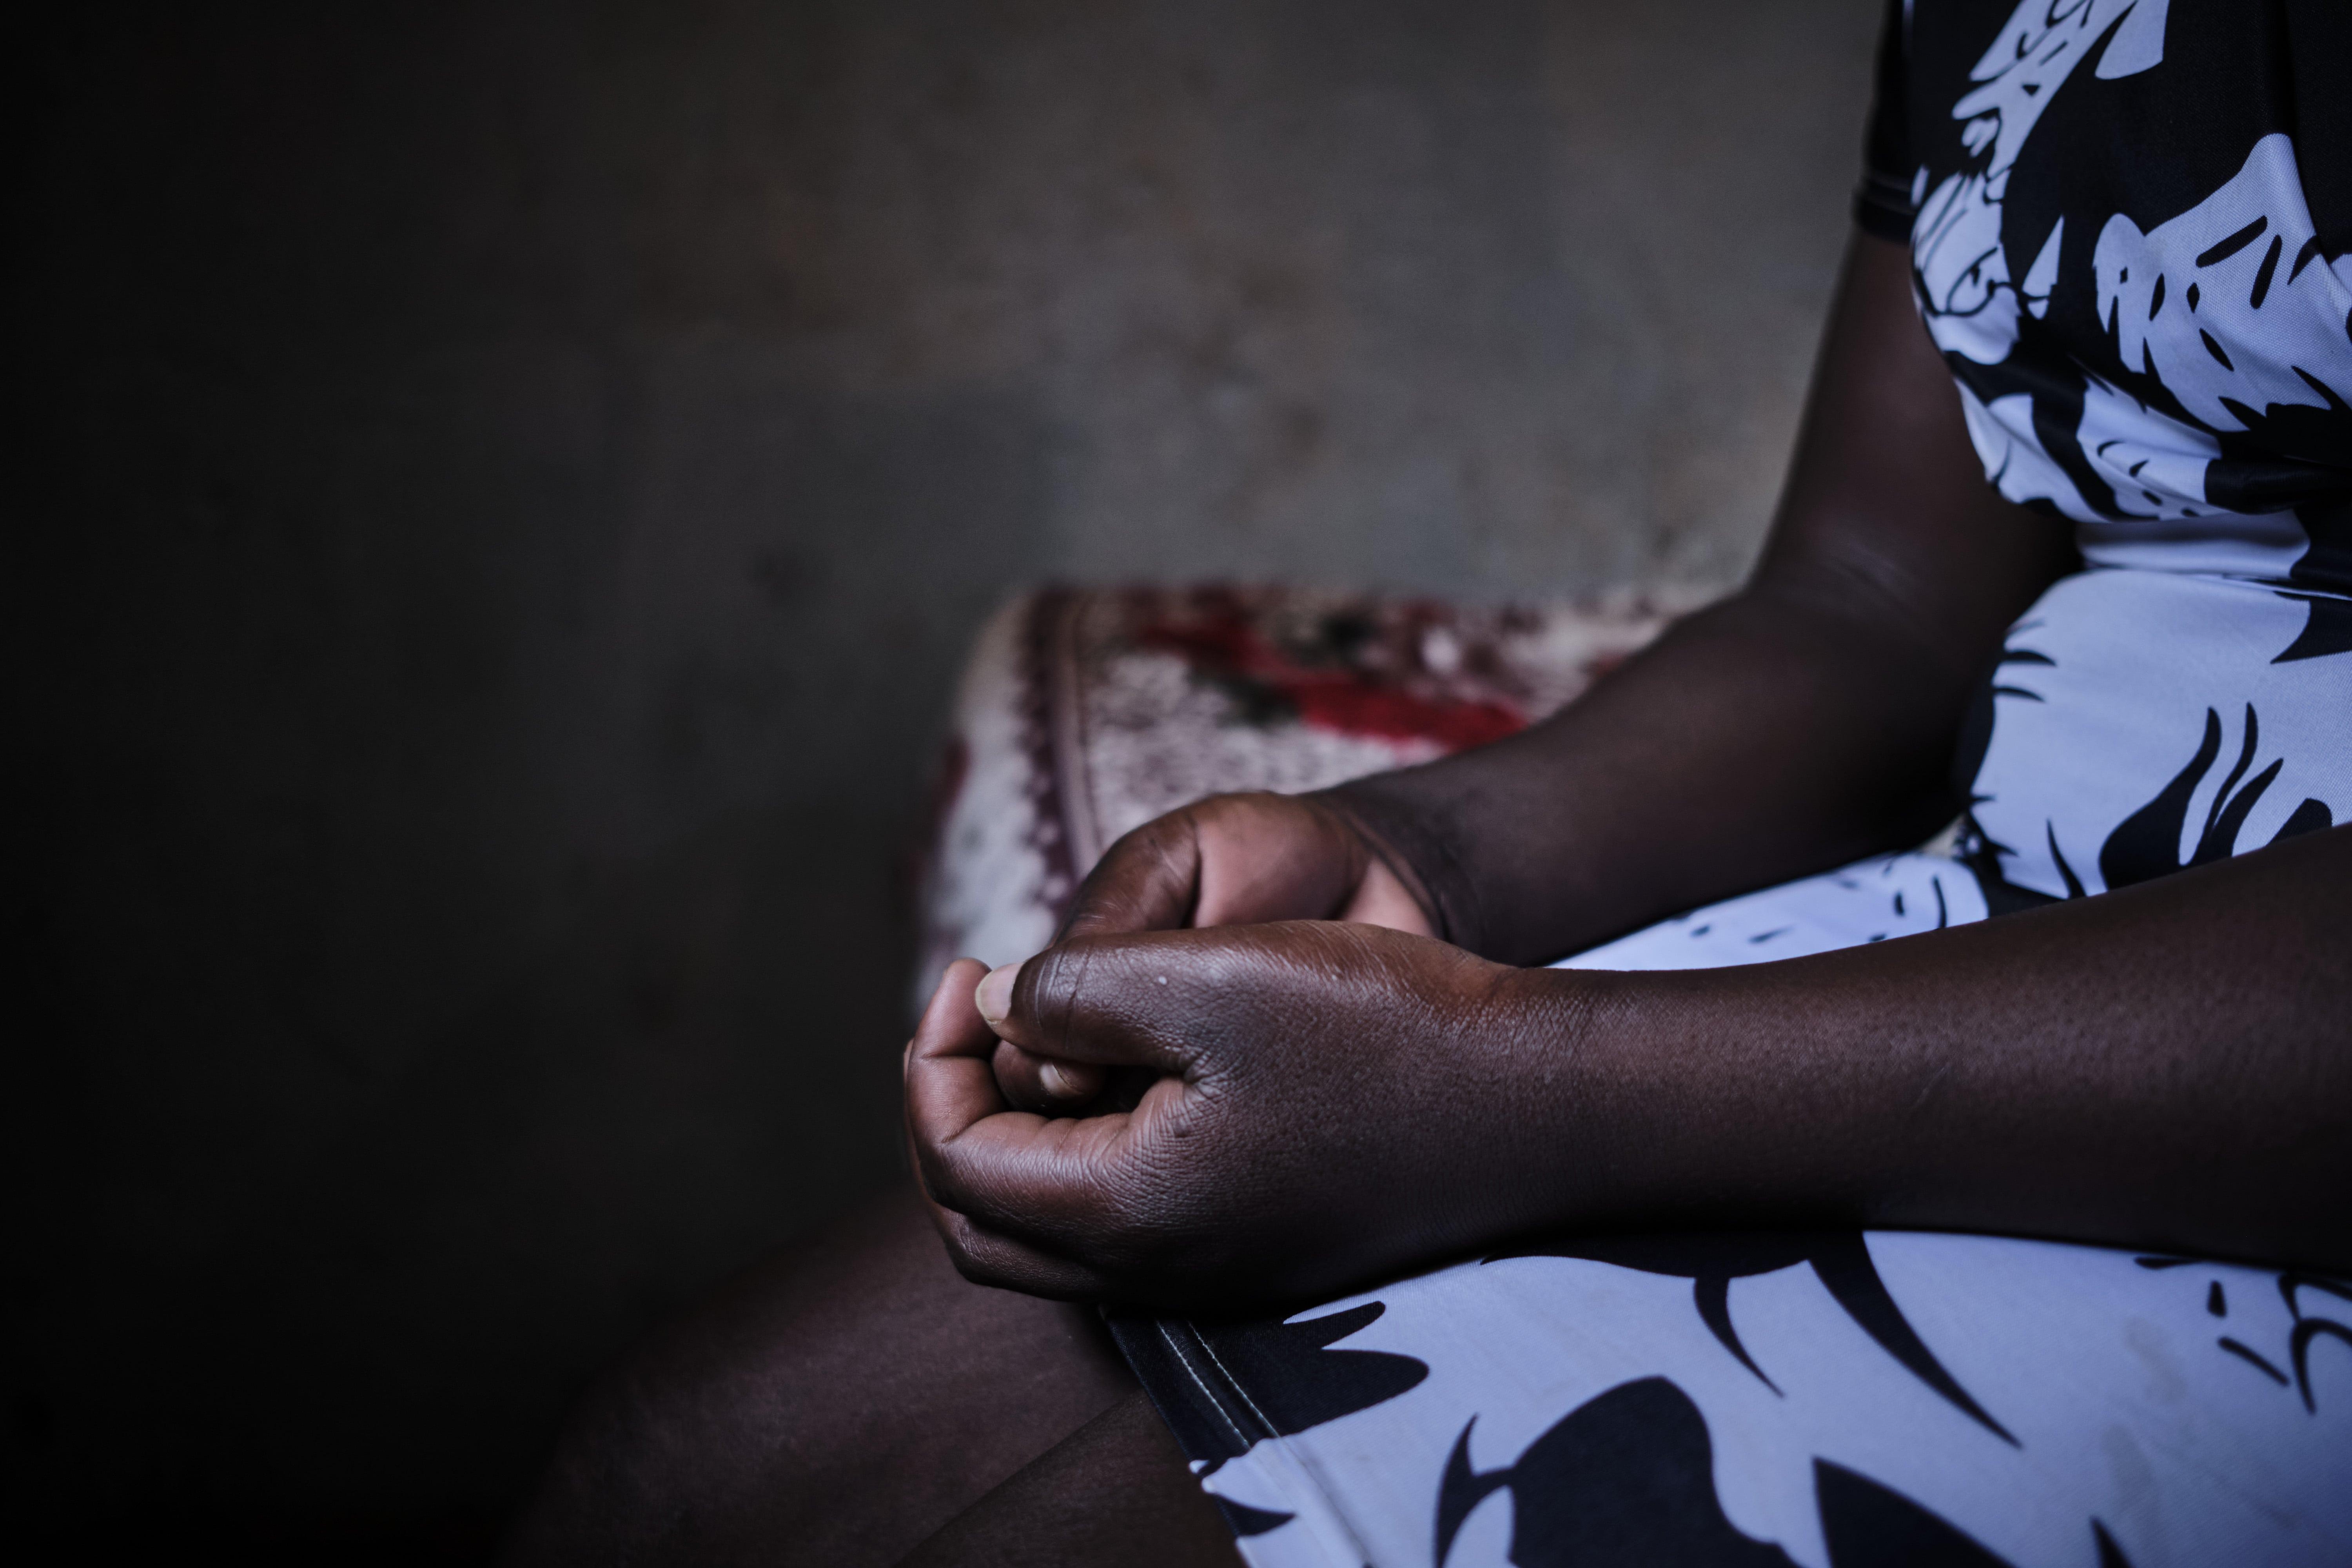 Sex Workers in Malawi: "There is nothing good about this job. Every day, I think about whether to leave or continue, but I can't choose to leave; I have no money." Hamida Ajida says she has no choice: engaging in sex work is her only option.